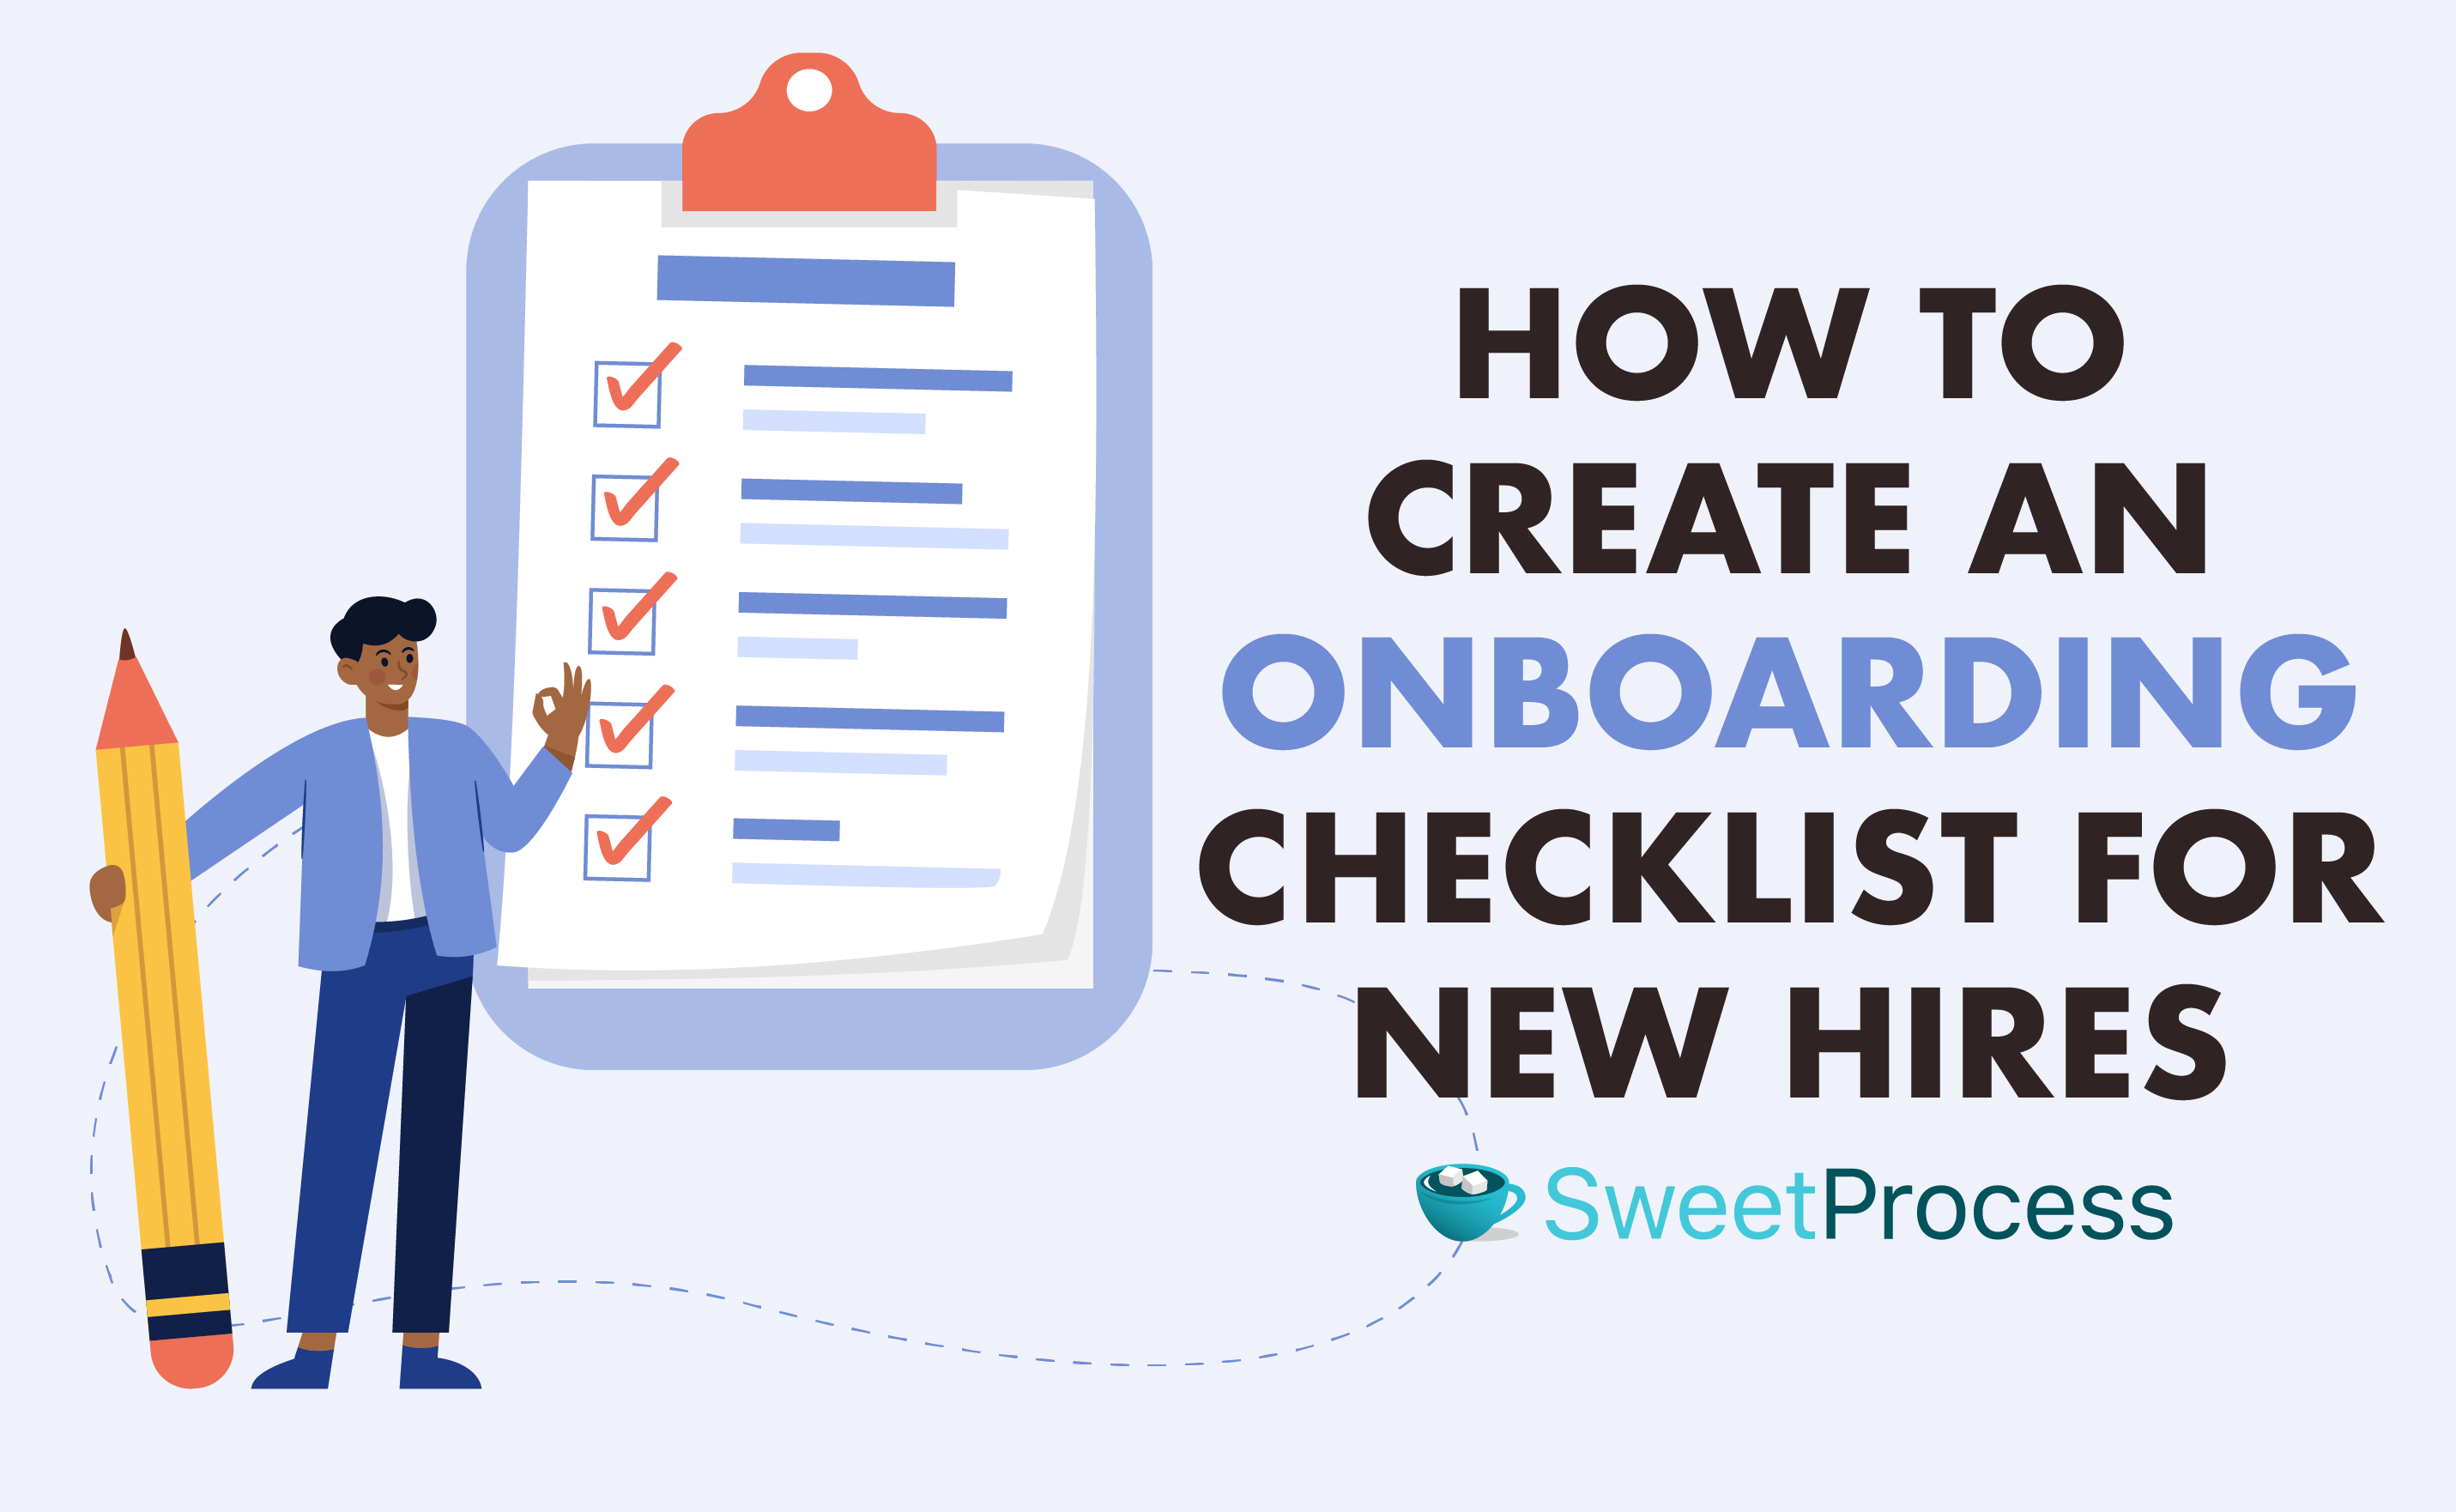 How To Create an Onboarding Checklist for New Hires